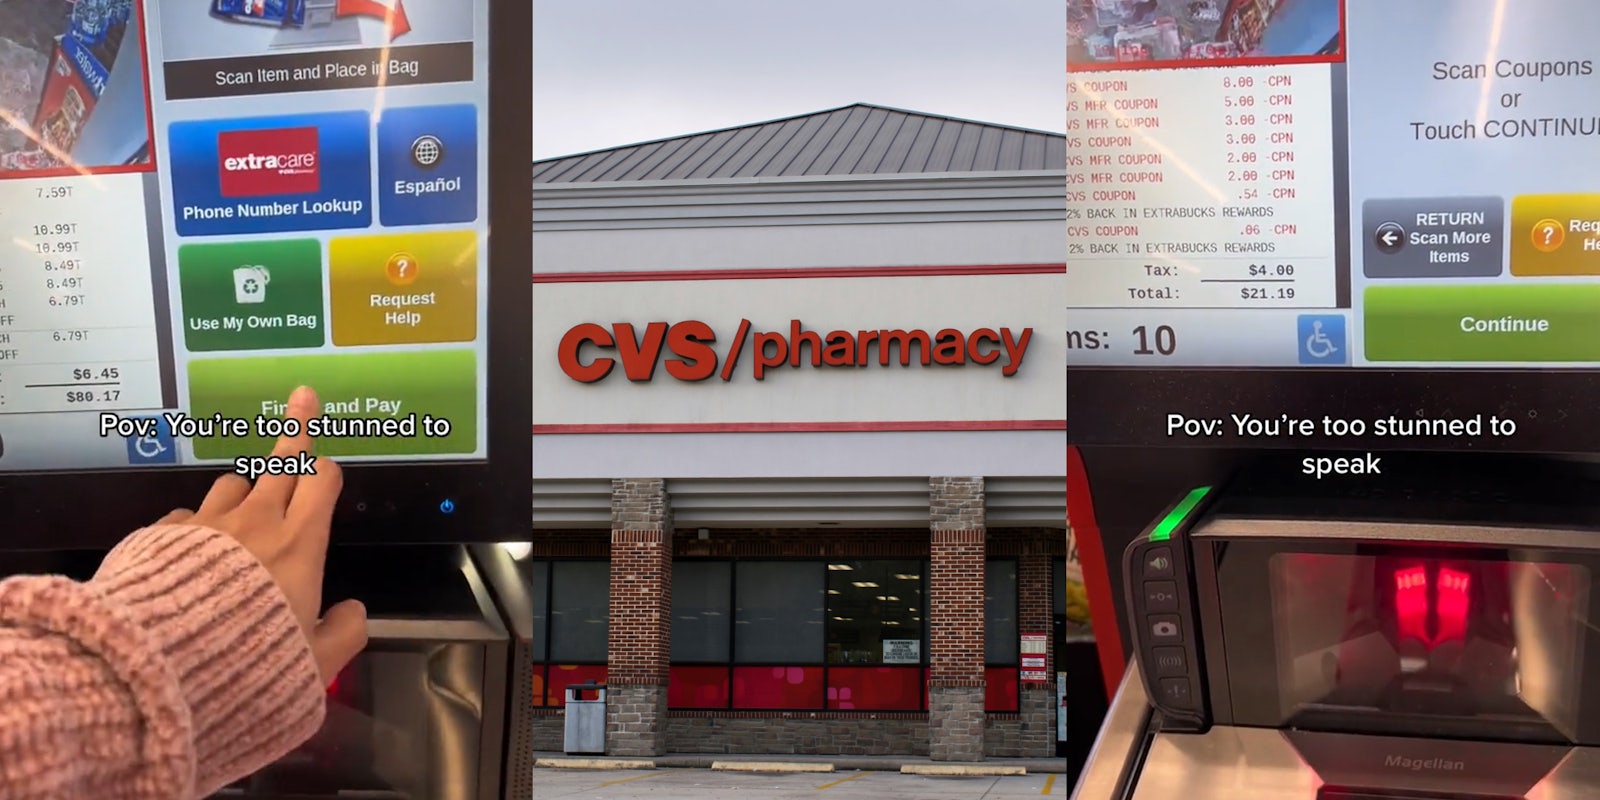 CVS checkout with total at $80.17 with caption 'Pov: You're too stunned to speak' (l) CVS building with sign (c) CVS checkout with total at $21.19 with caption 'Pov: You're too stunned to speak' (r)